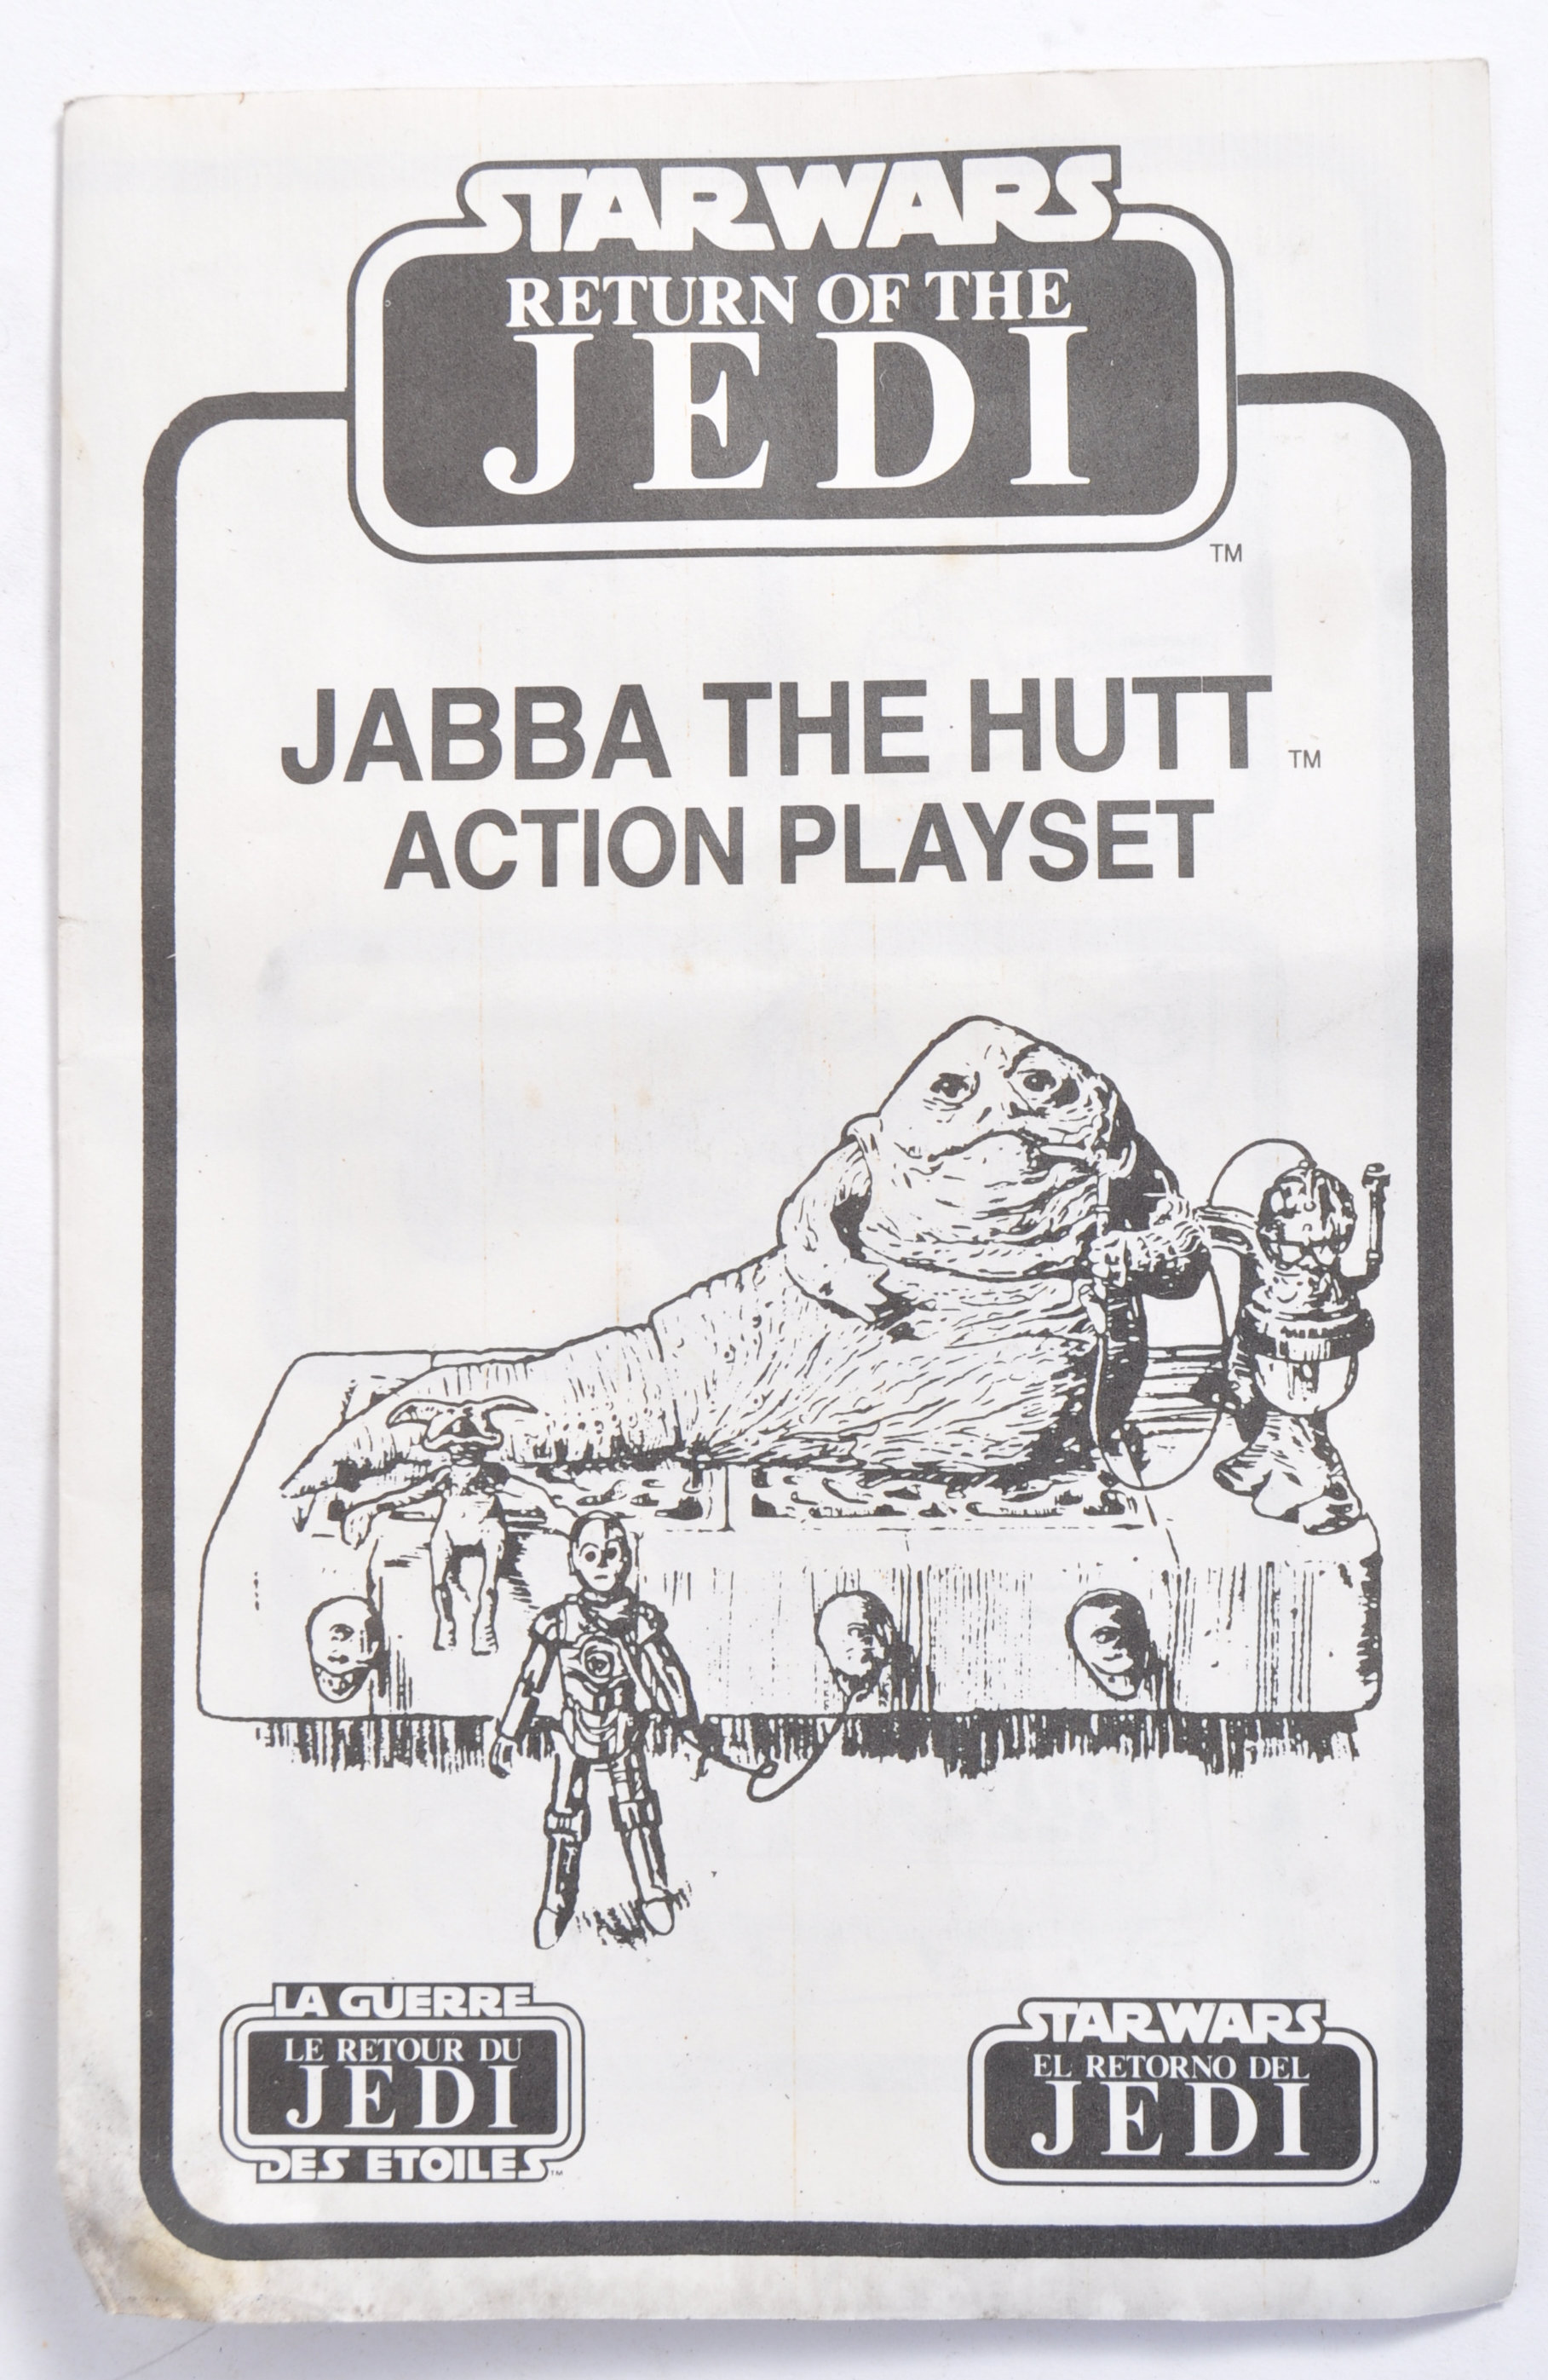 VINTAGE STAR WARS KENNER JABBA THE HUTT ACTION FIGURE PLAYSET - Image 6 of 8